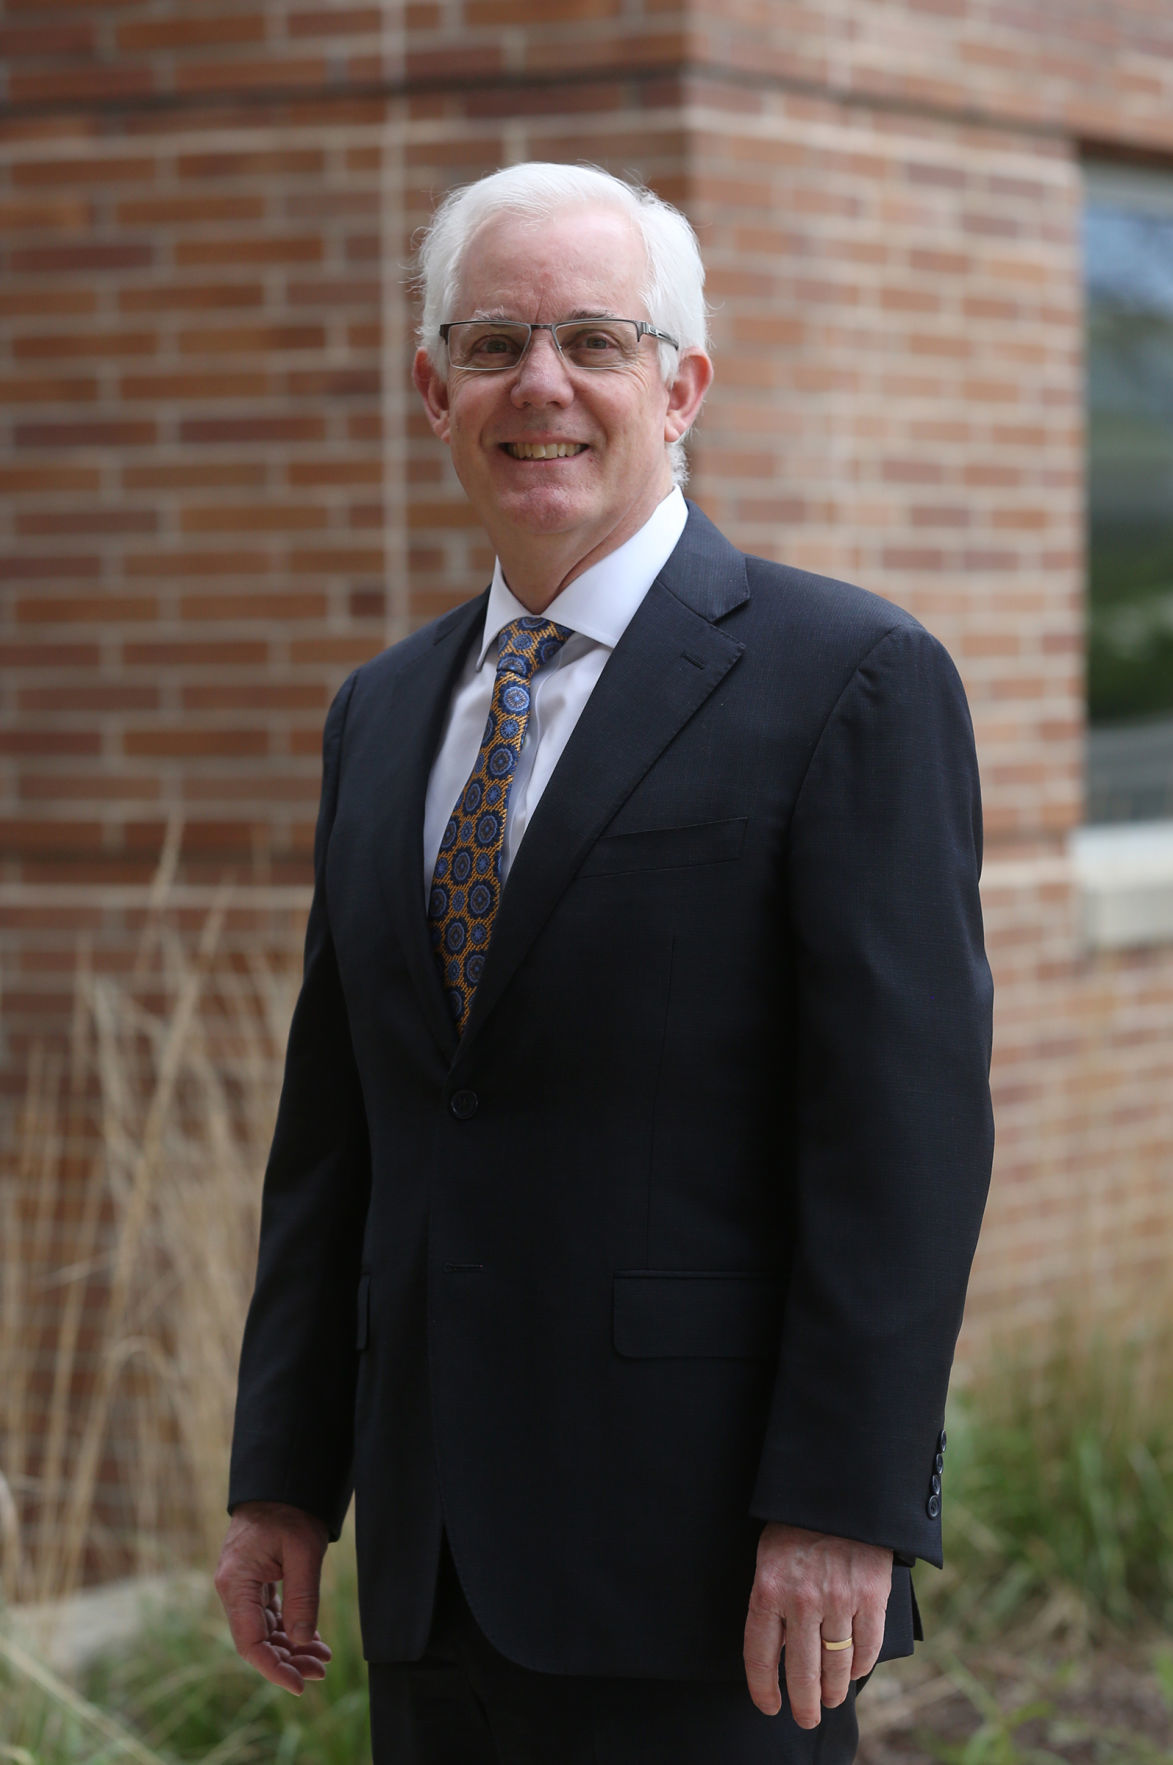 John Tallent is the CEO of Medical Associates Clinic & Health Plans and will be featured in the Biz Times’ Meet a Local Leader. Photo taken Wednesday, May 6, 2020. PHOTO CREDIT: Jessica Reilly